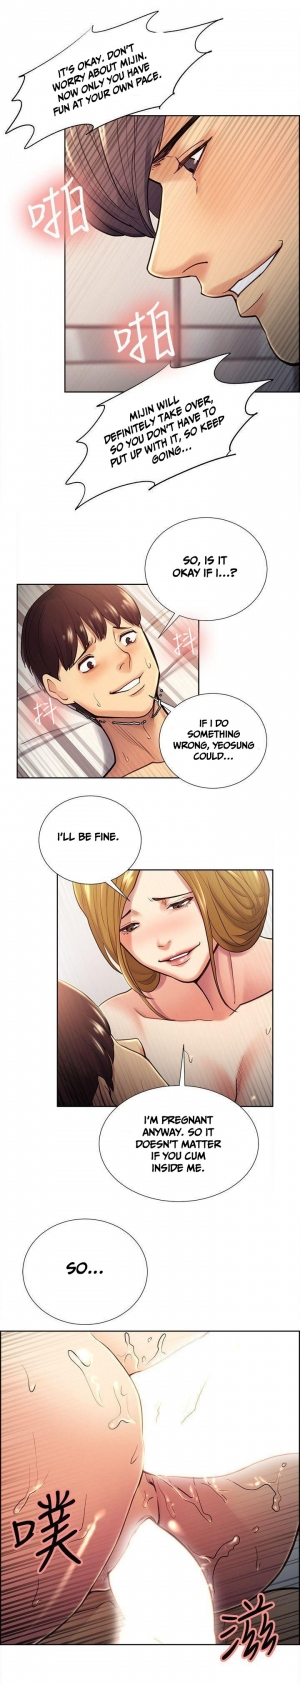 [Serious] Taste of Forbbiden Fruit Ch.36/53 [English] [Hentai Universe] - Page 550